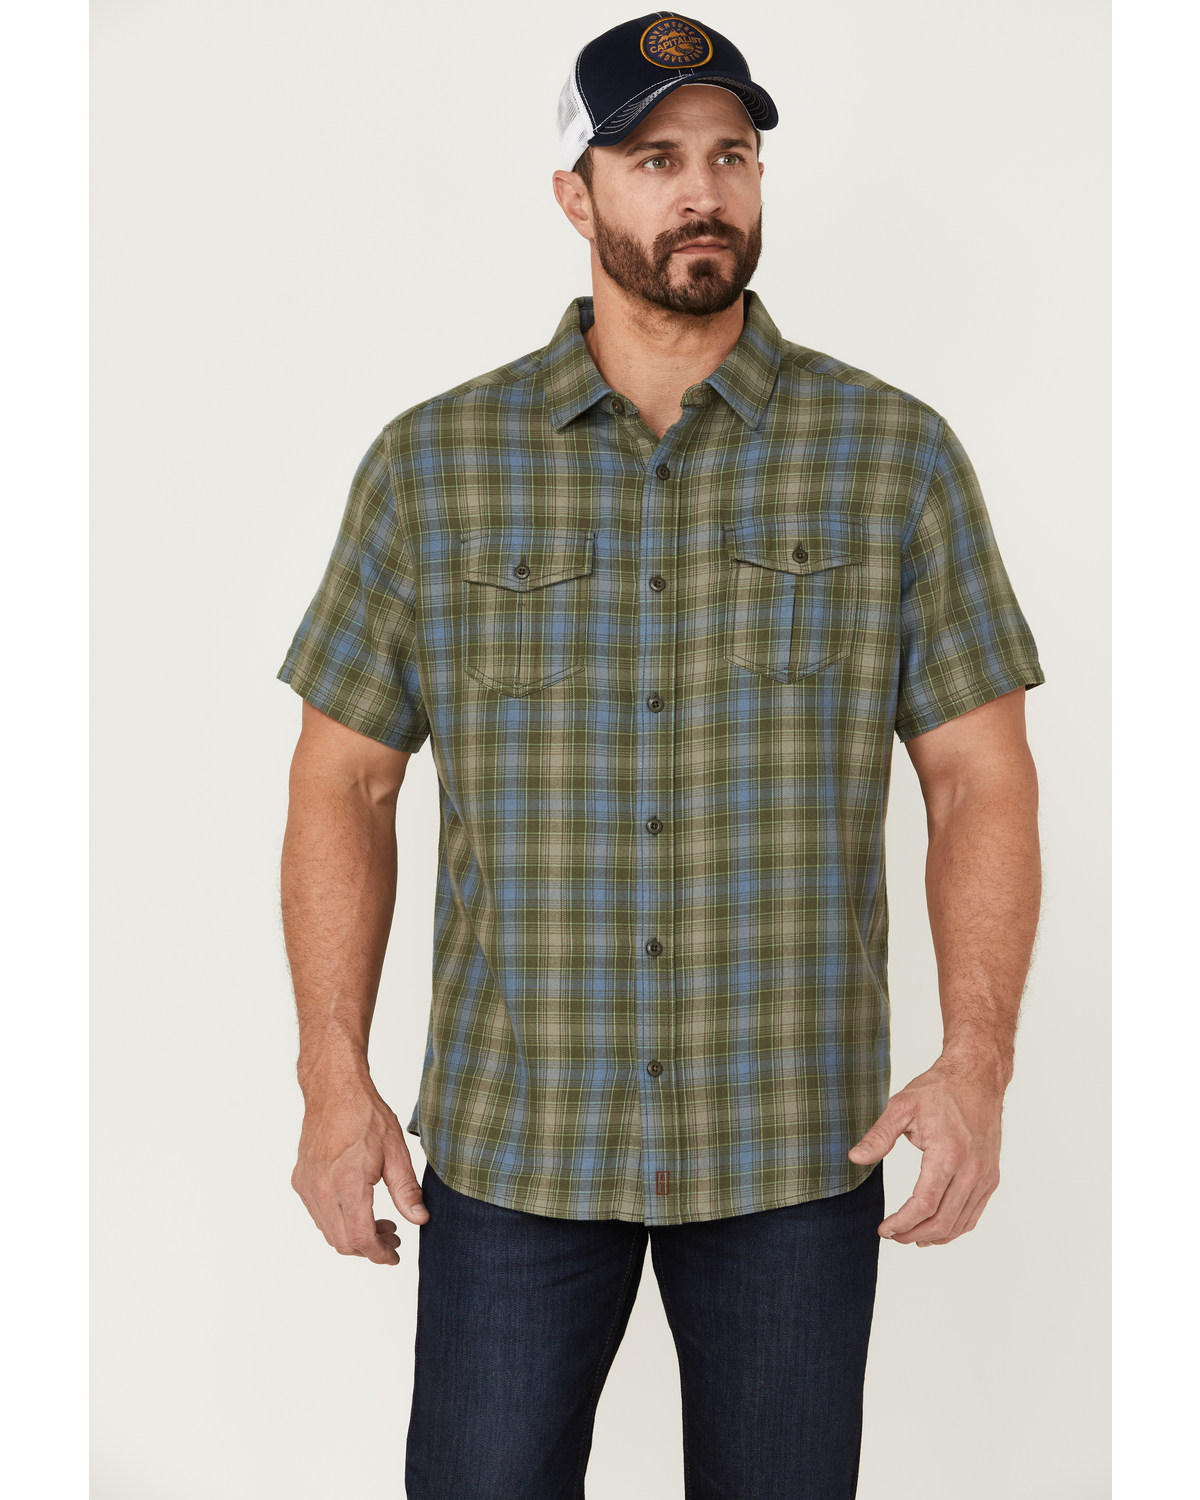 Brothers and Sons Men's Plaid Casual Woven Short Sleeve Button-Down Western Shirt